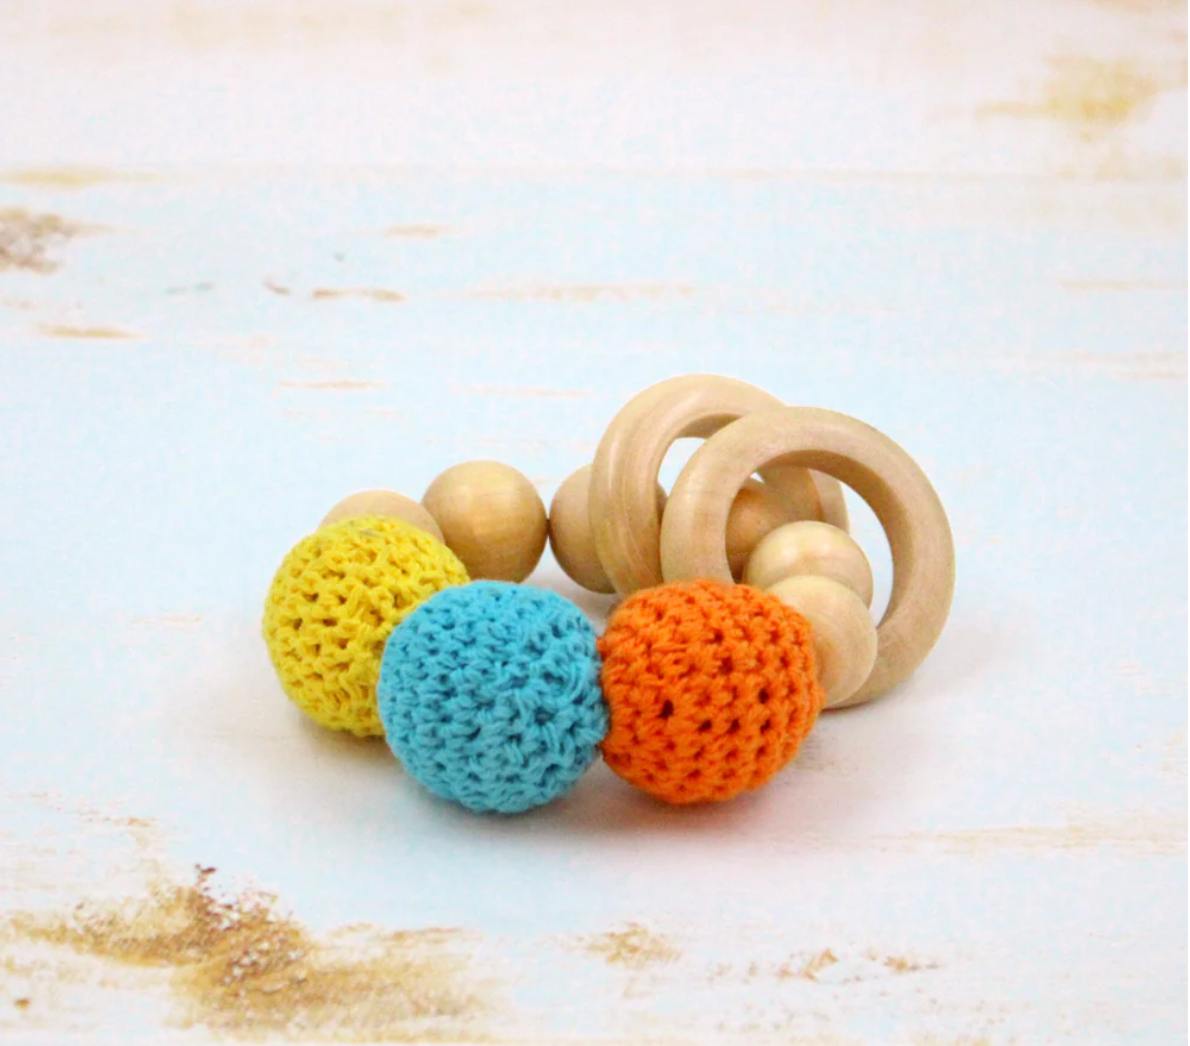 Shumee Wooden Crochet Teether and Rattle Ring Toy for (0-2 years)